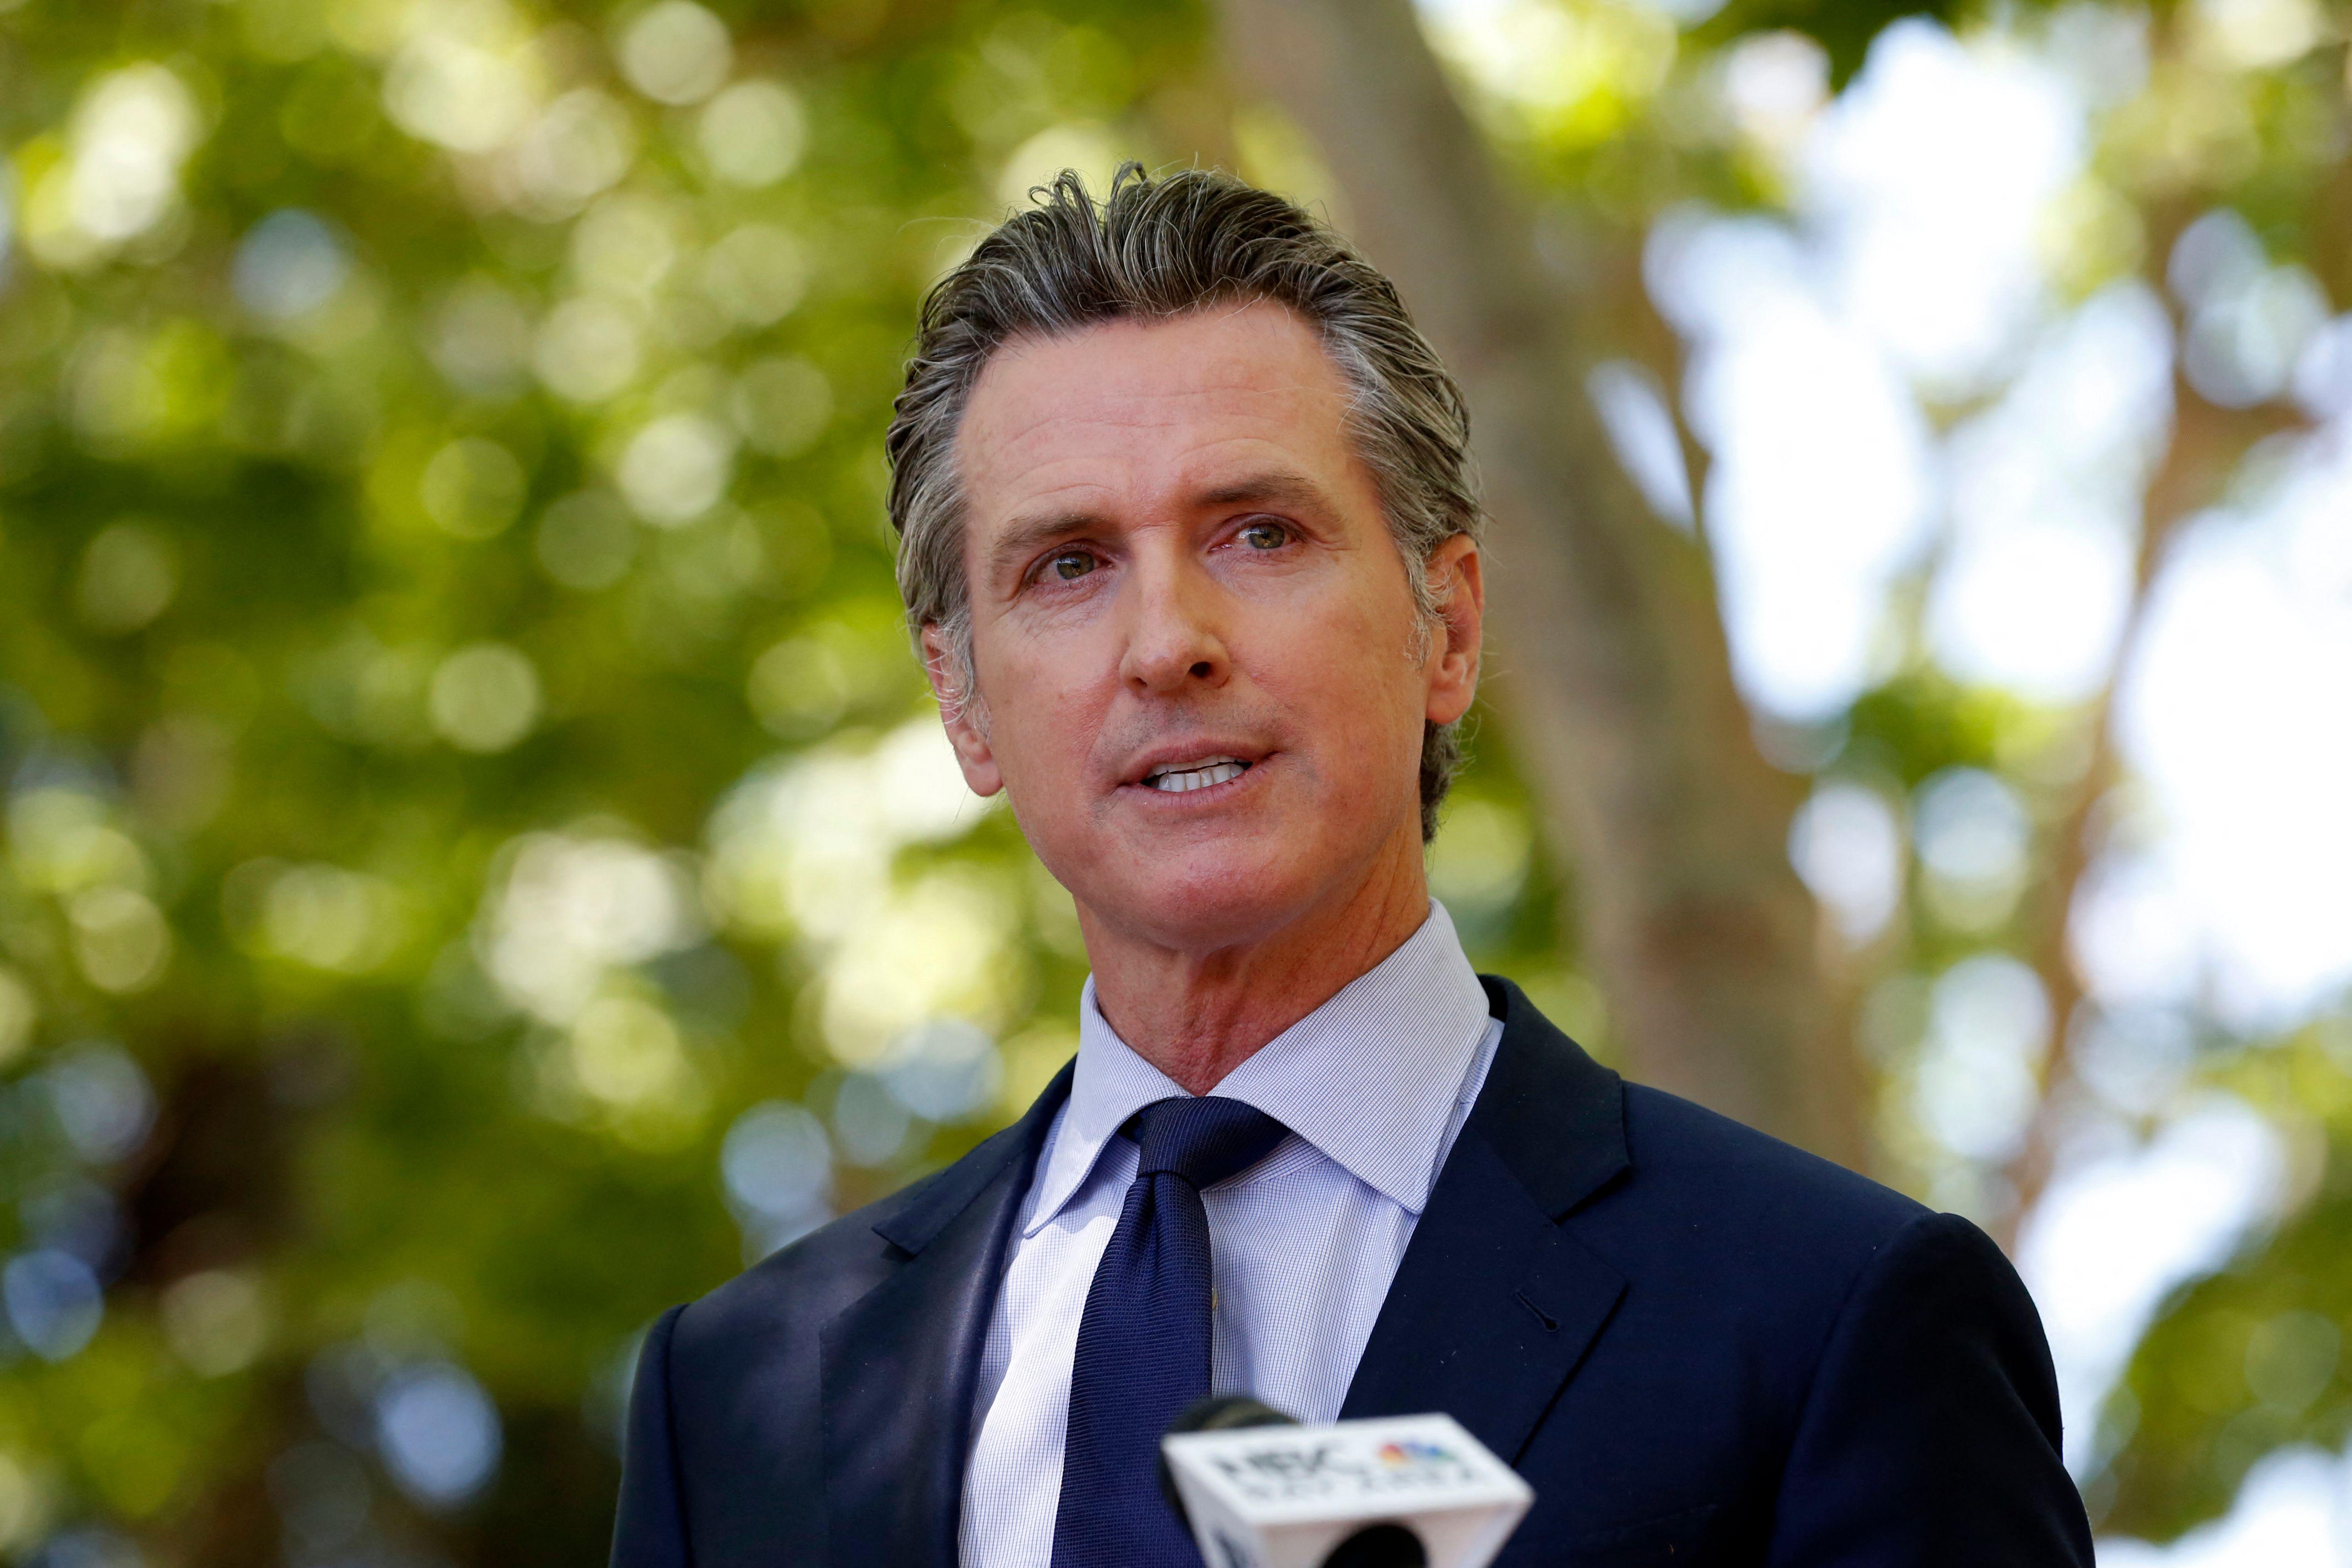 Gavin Newsom speaks into a microphone at a press conference outdoors.